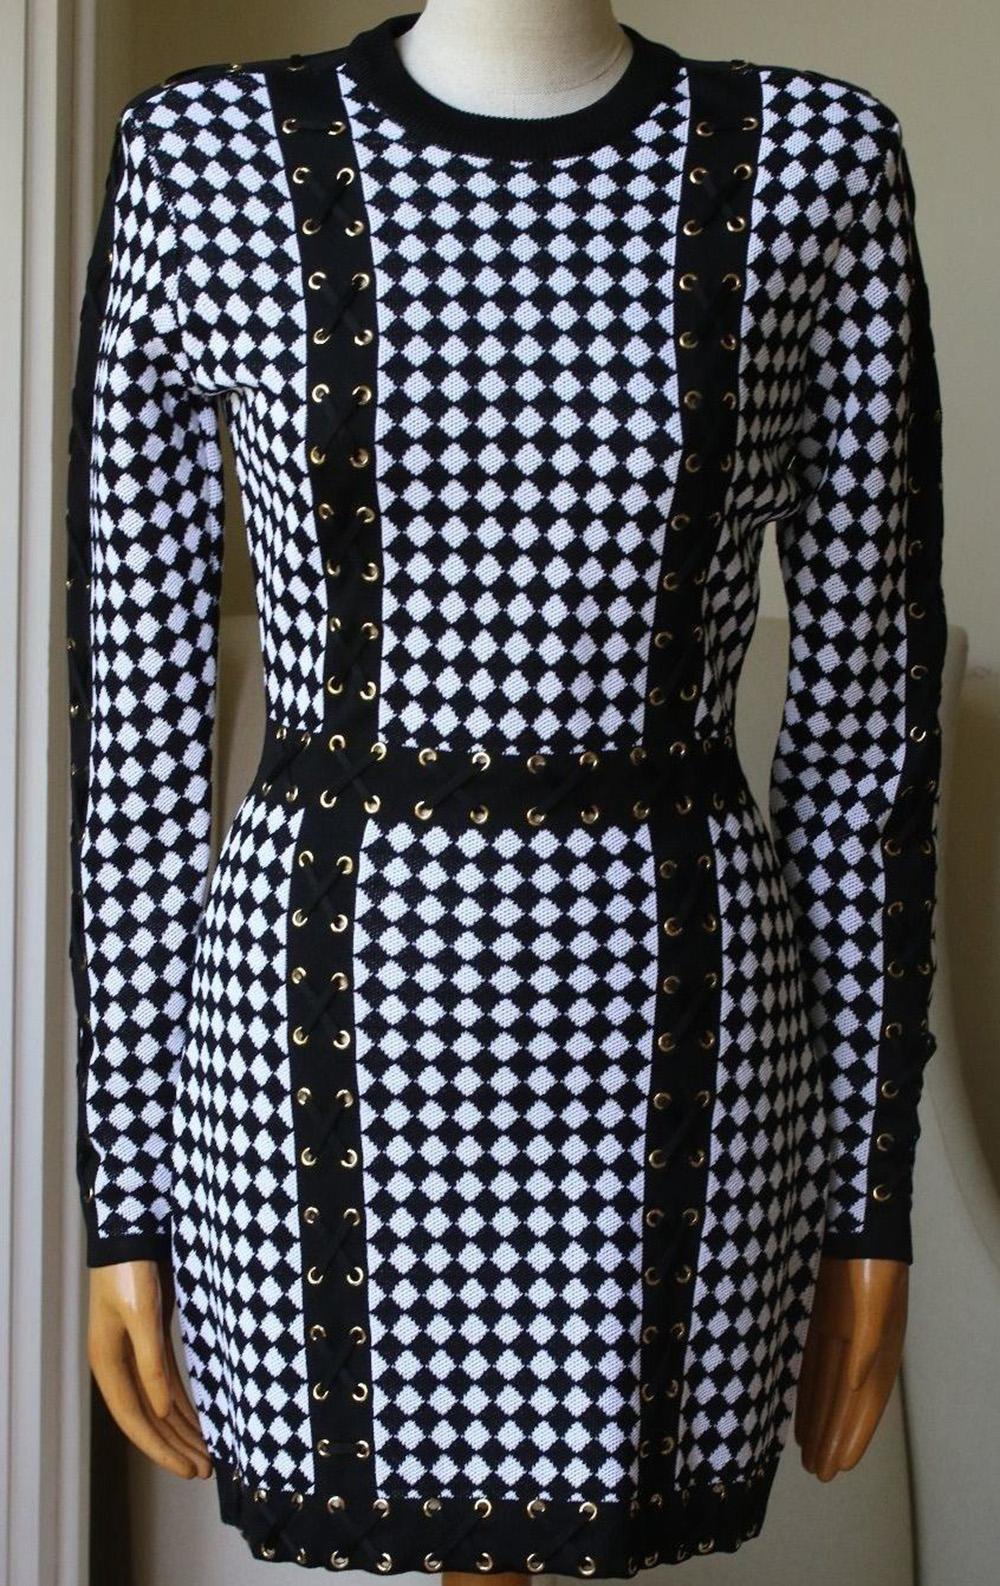 Black and white checked knit dress from Balmain featuring a ribbed round neck, long sleeves, a rear zip fastening, a lace up detail, a fitted silhouette and a short length.

Size: FR 38 (UK 10, US 6, IT 42)

Condition: As new condition, no sign of